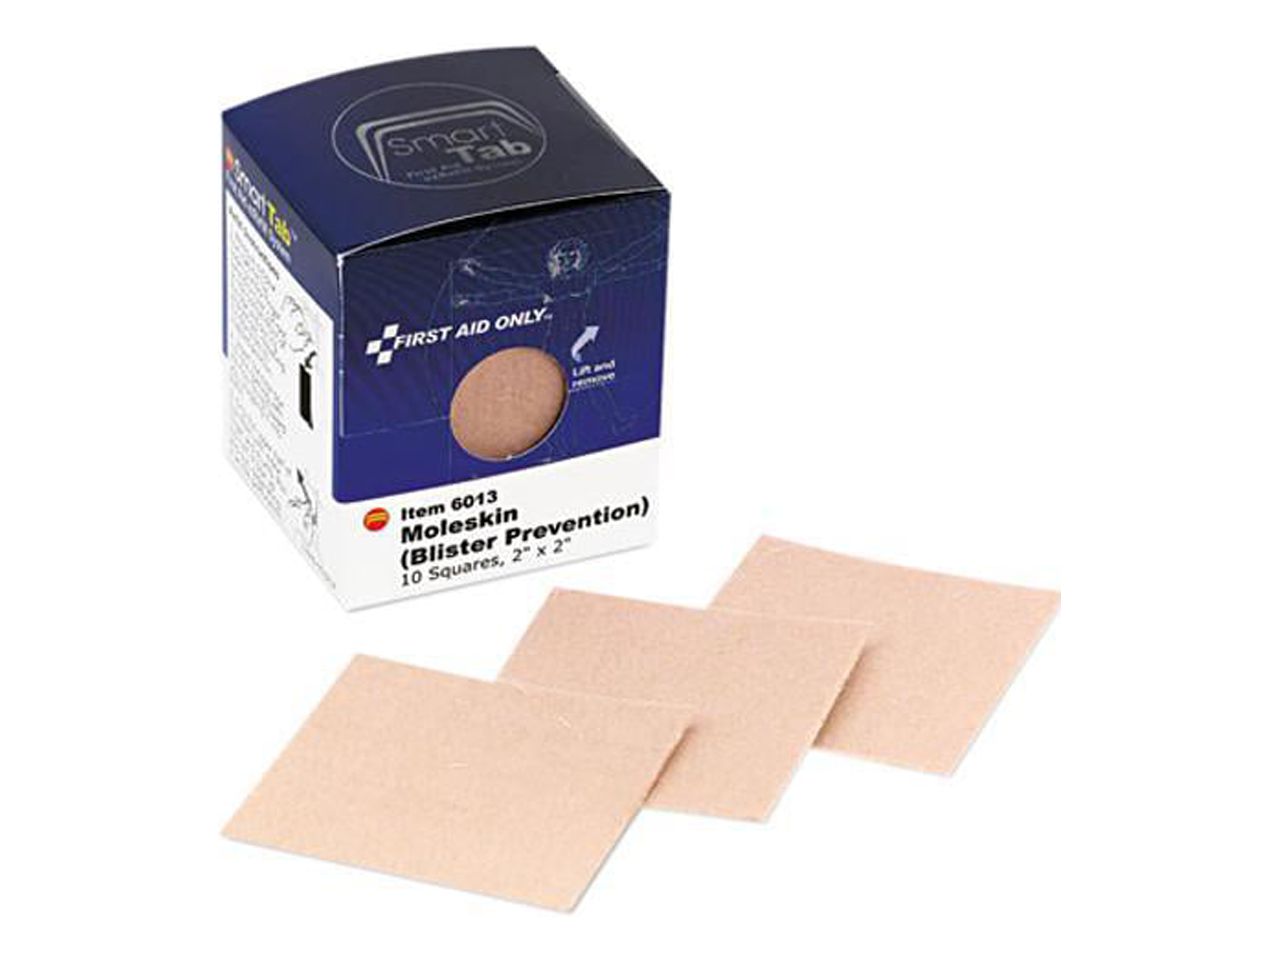 First Aid Only FAE-6013 Moleskin/Blister Protection, 2” Squares, 10/Box - image 1 of 3